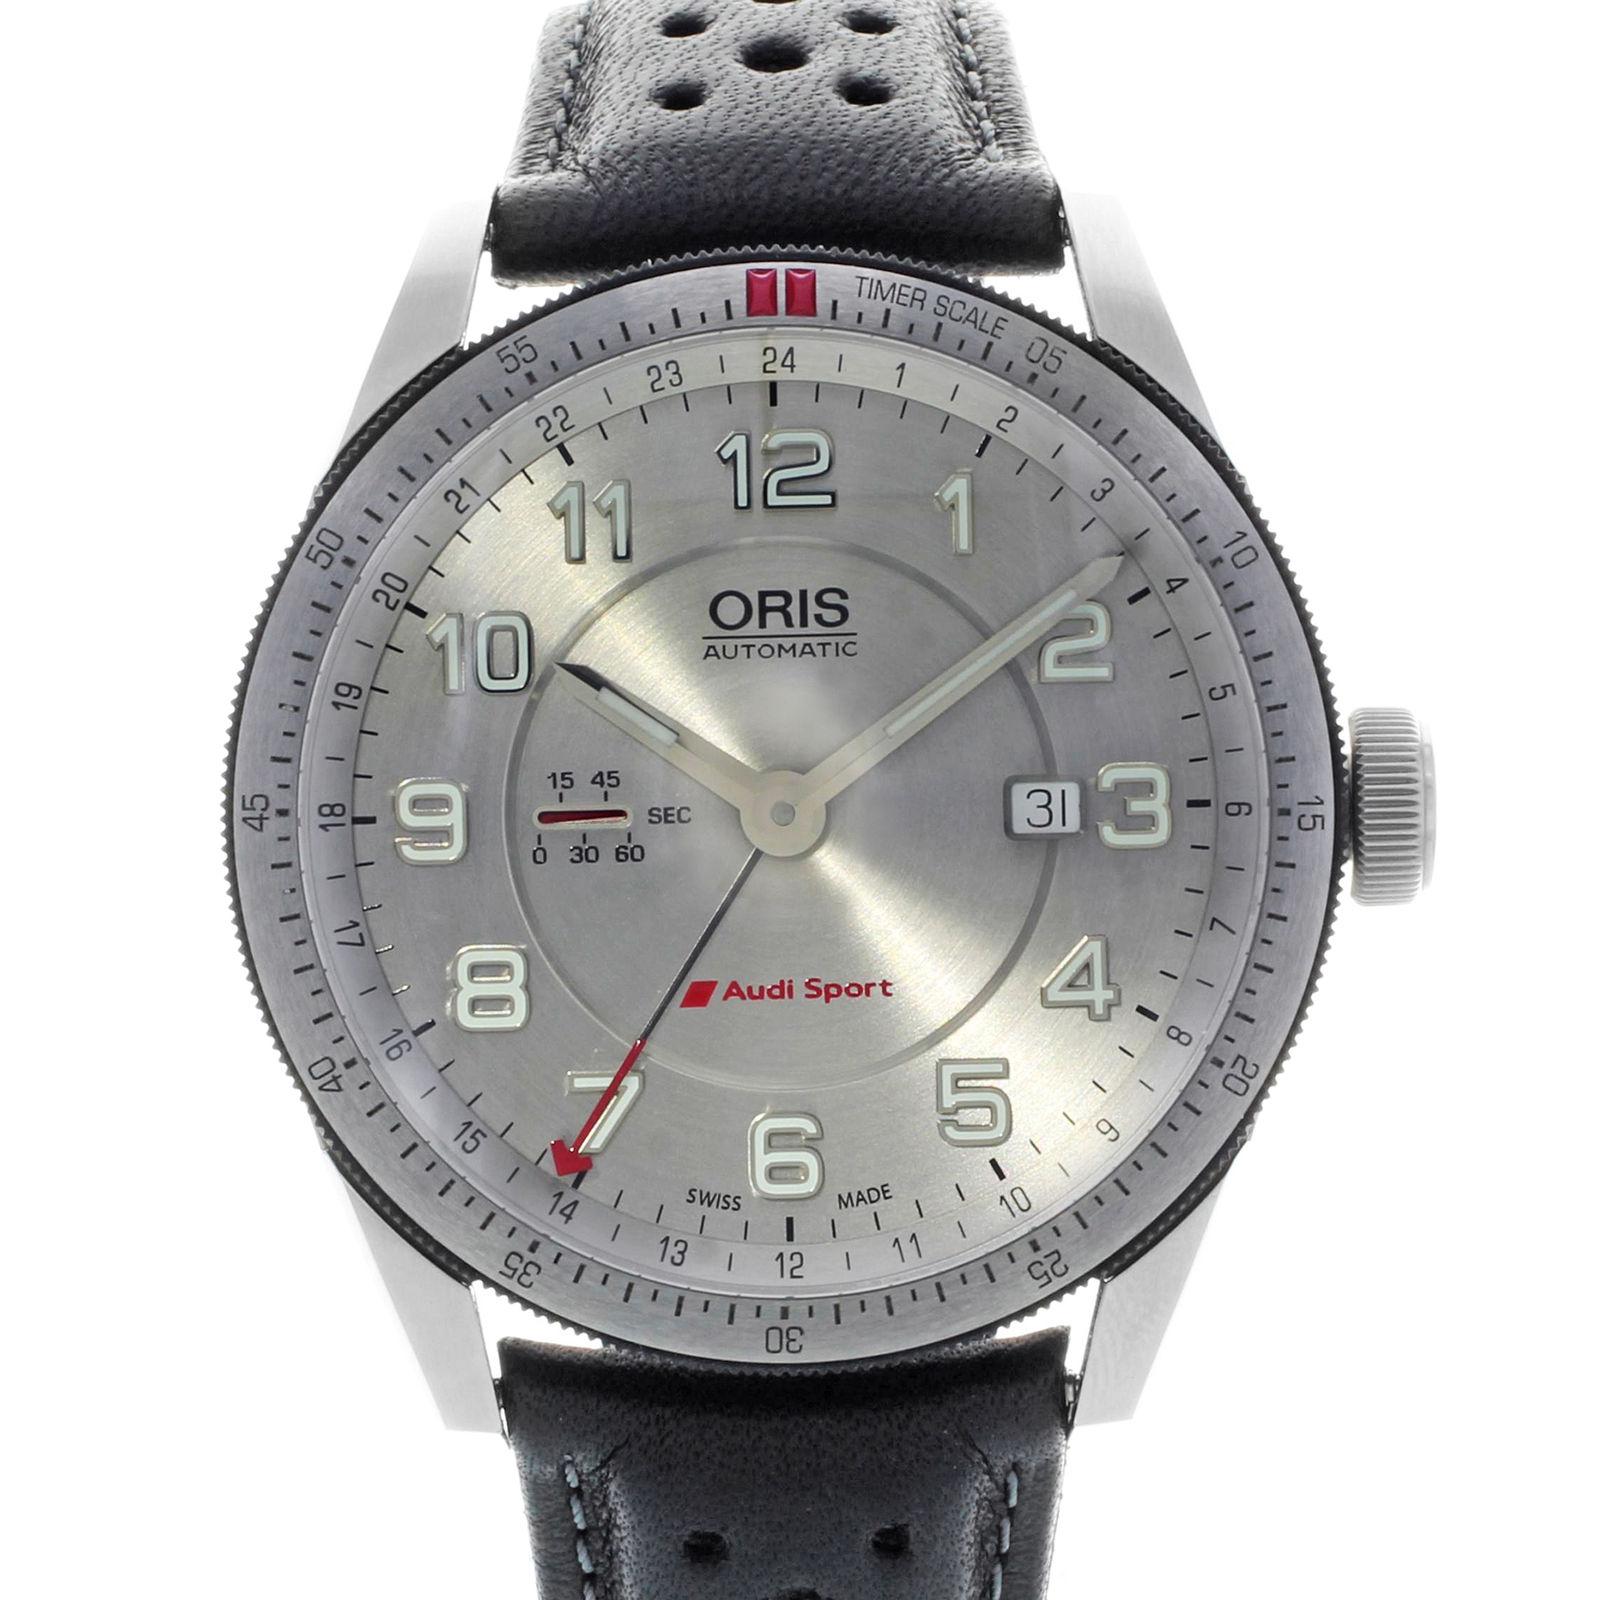 (20975)
This pre-owned Oris Artix 747-7701-4461LS is a beautiful men's timepiece that is powered by an automatic movement which is cased in a stainless steel case. It has a round shape face, date, multiple time zone, power reserve indicator dial and